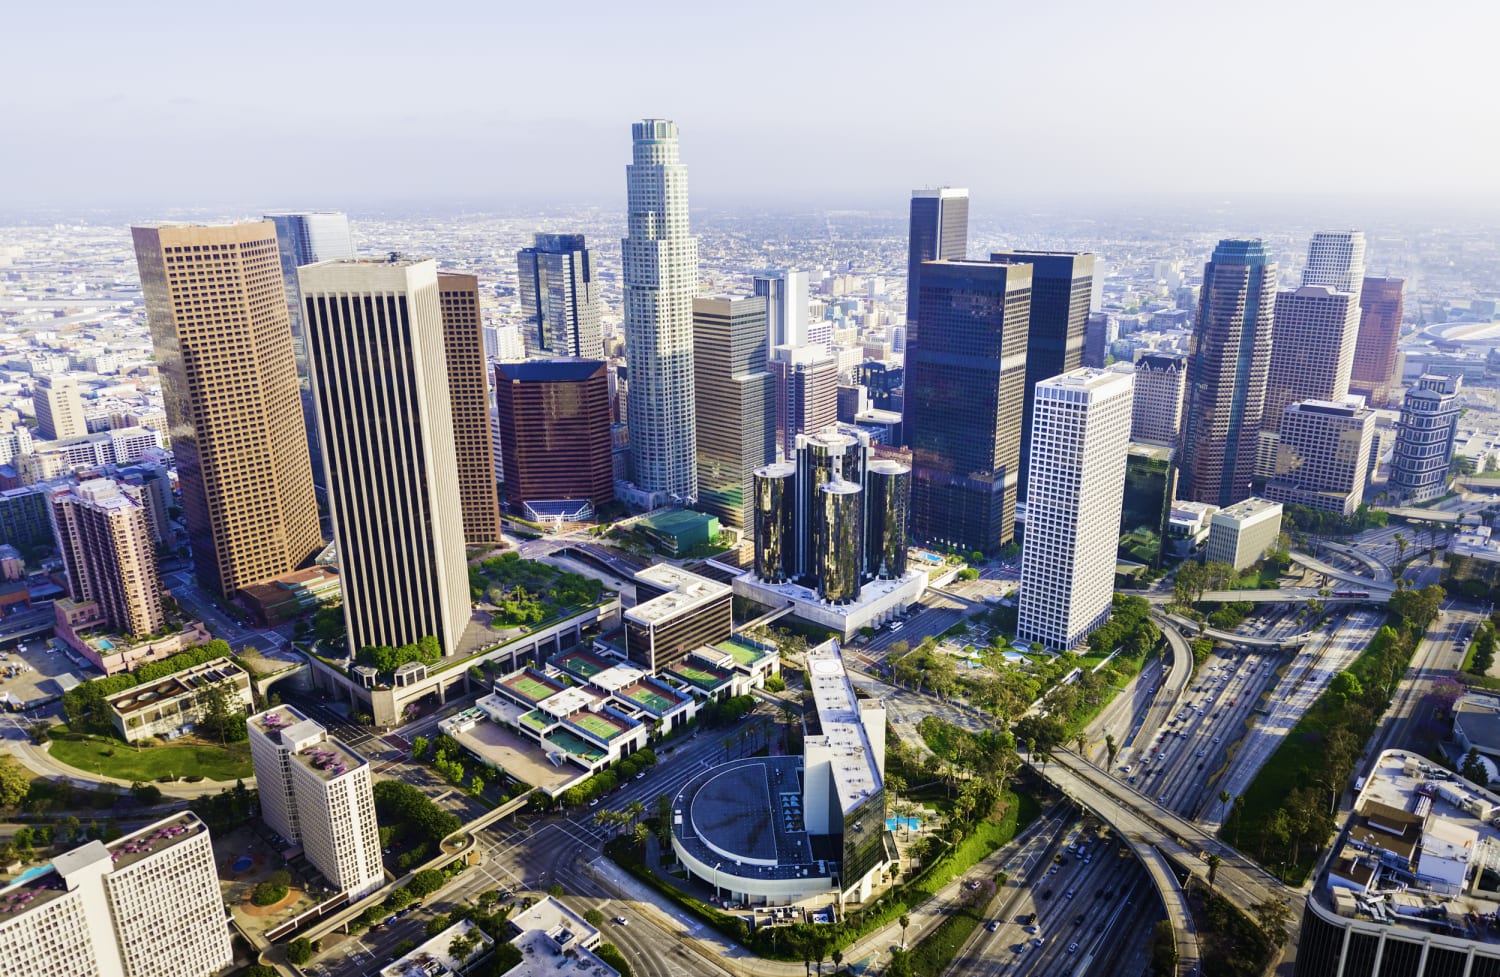 Los Angeles to Host 2028 Olympic Games, Paris Gets 2024